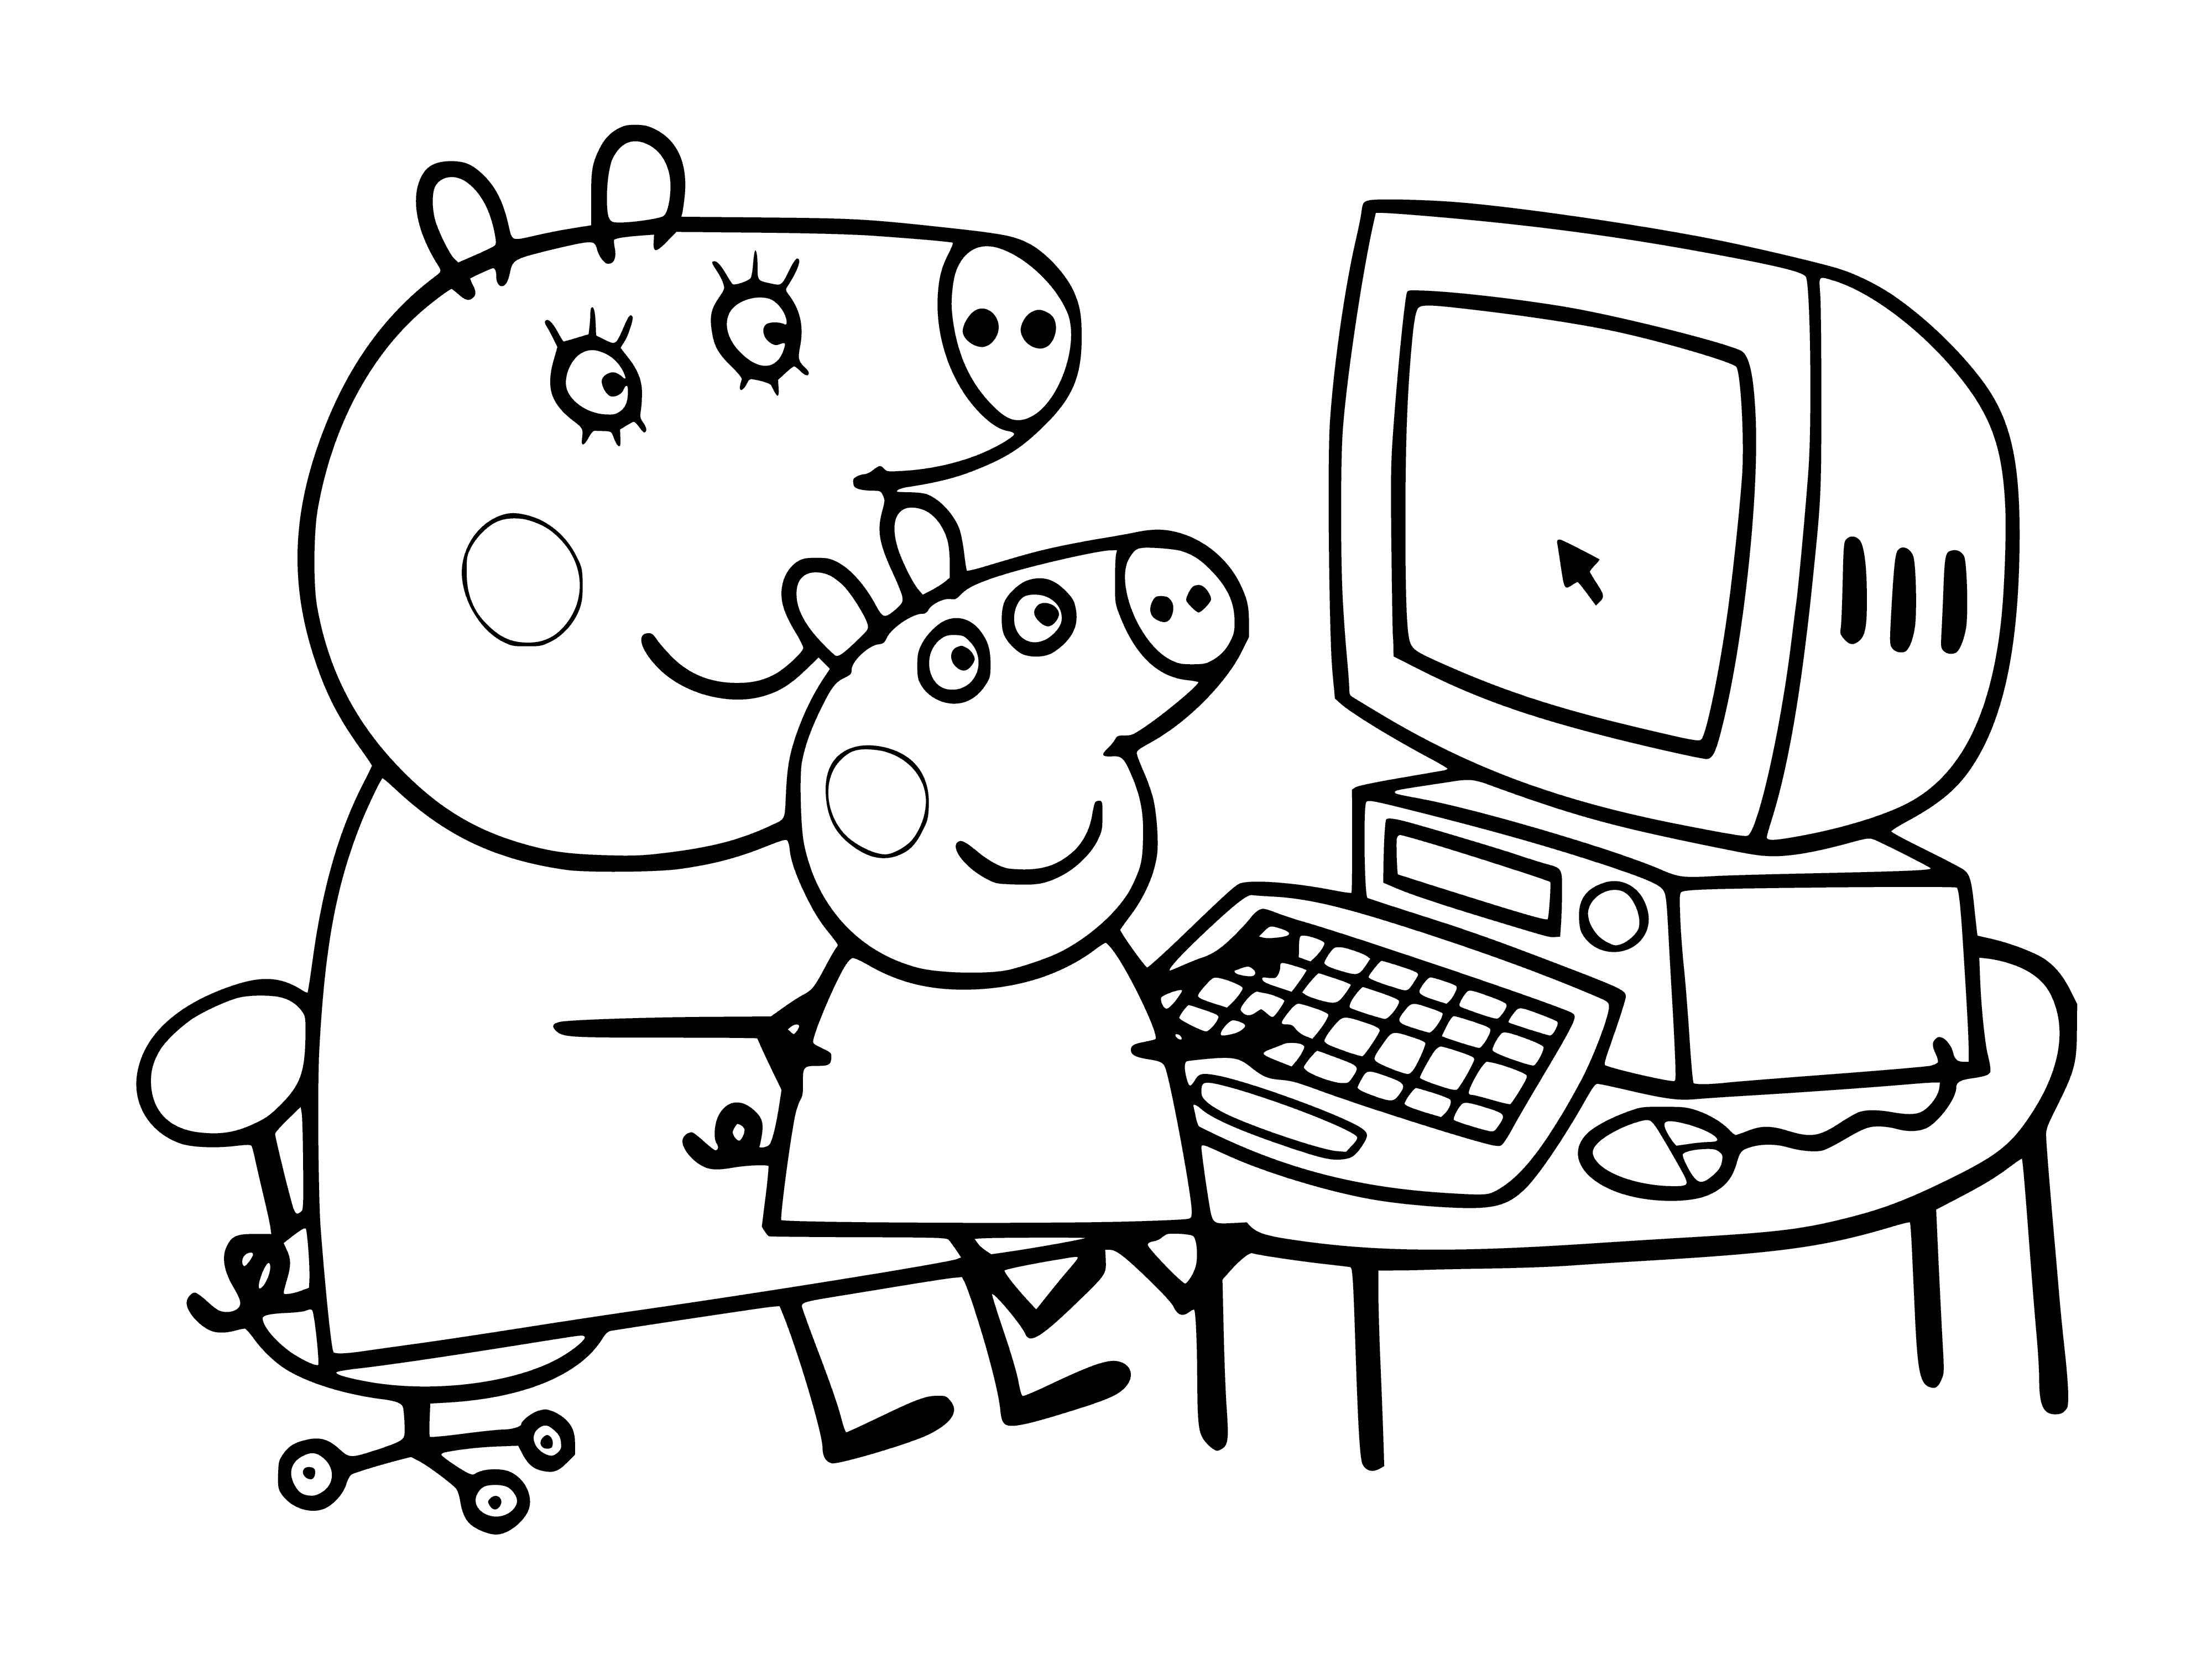 coloring page: Peppa Pig colors a butterfly on a computer, wearing a blue shirt & trousers. Hands on keyboard, looks at screen.